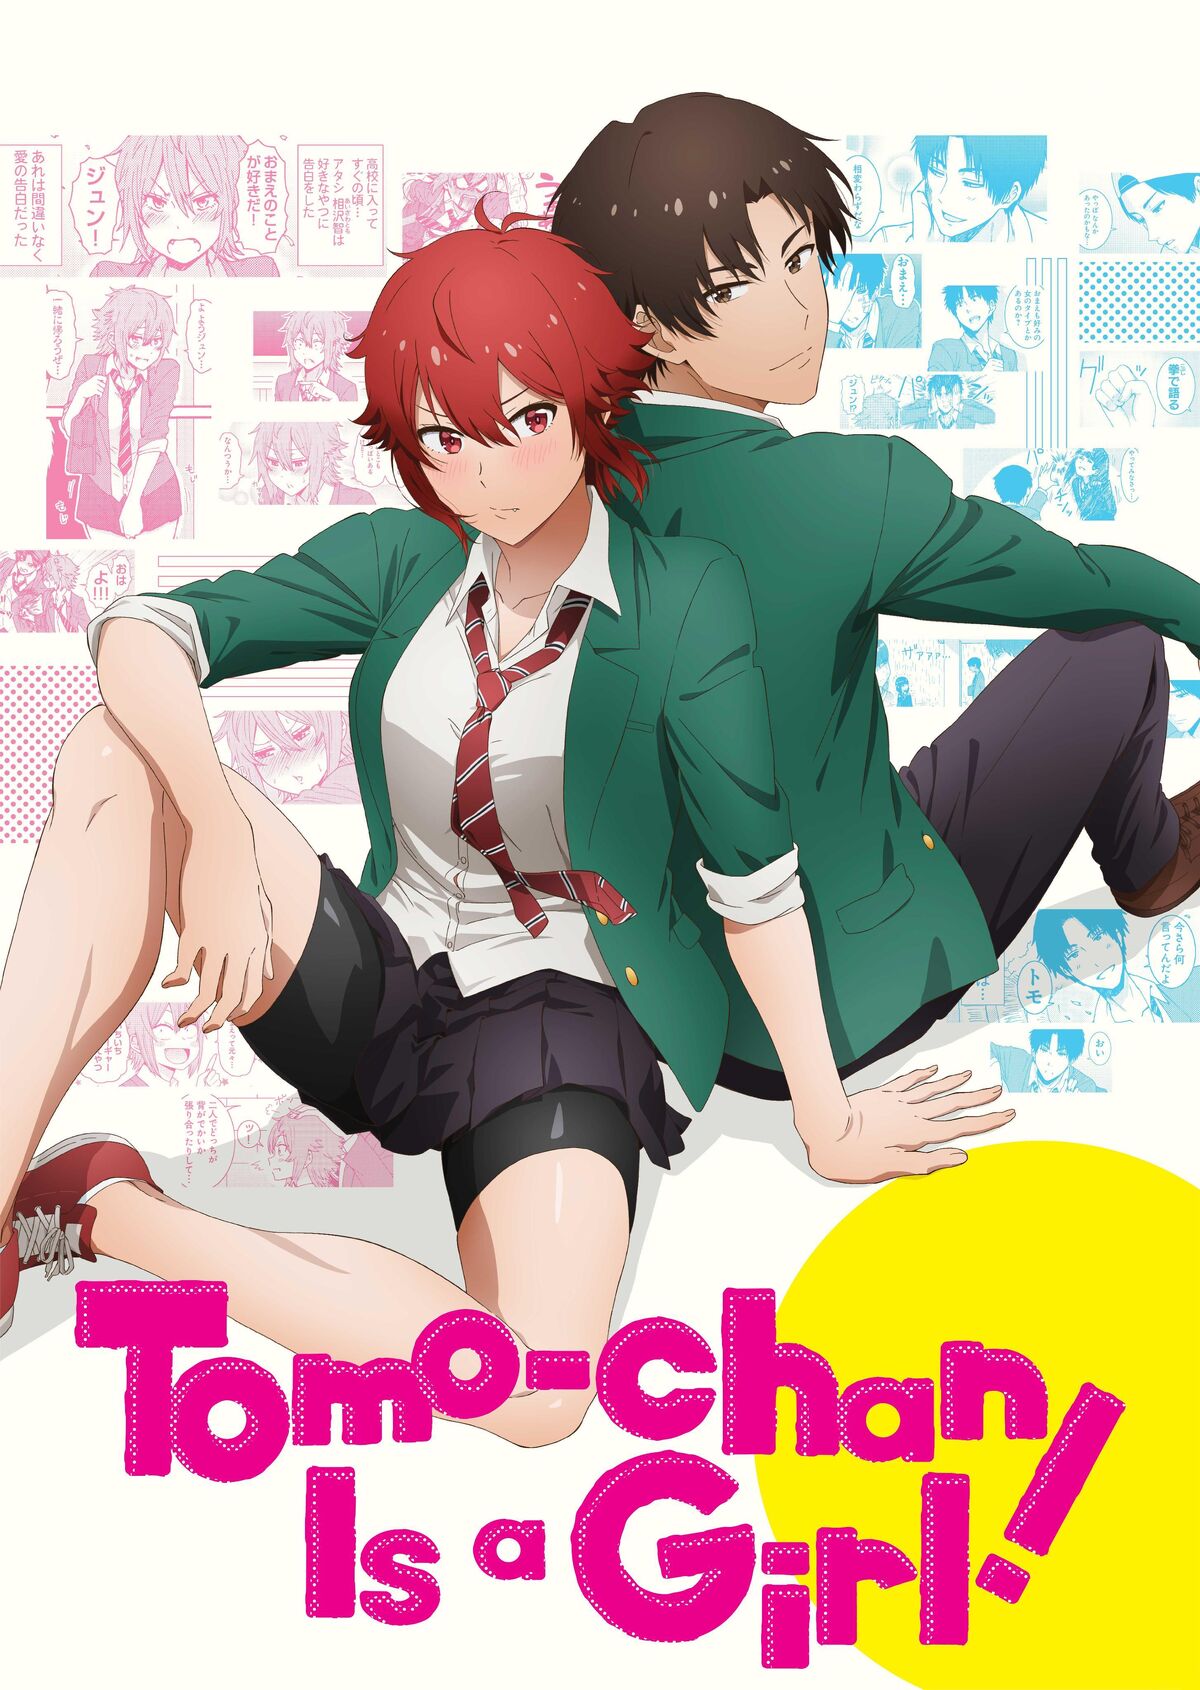 Tomo-chan Is a Girl's Carol Has the Same Voice in Japanese and English